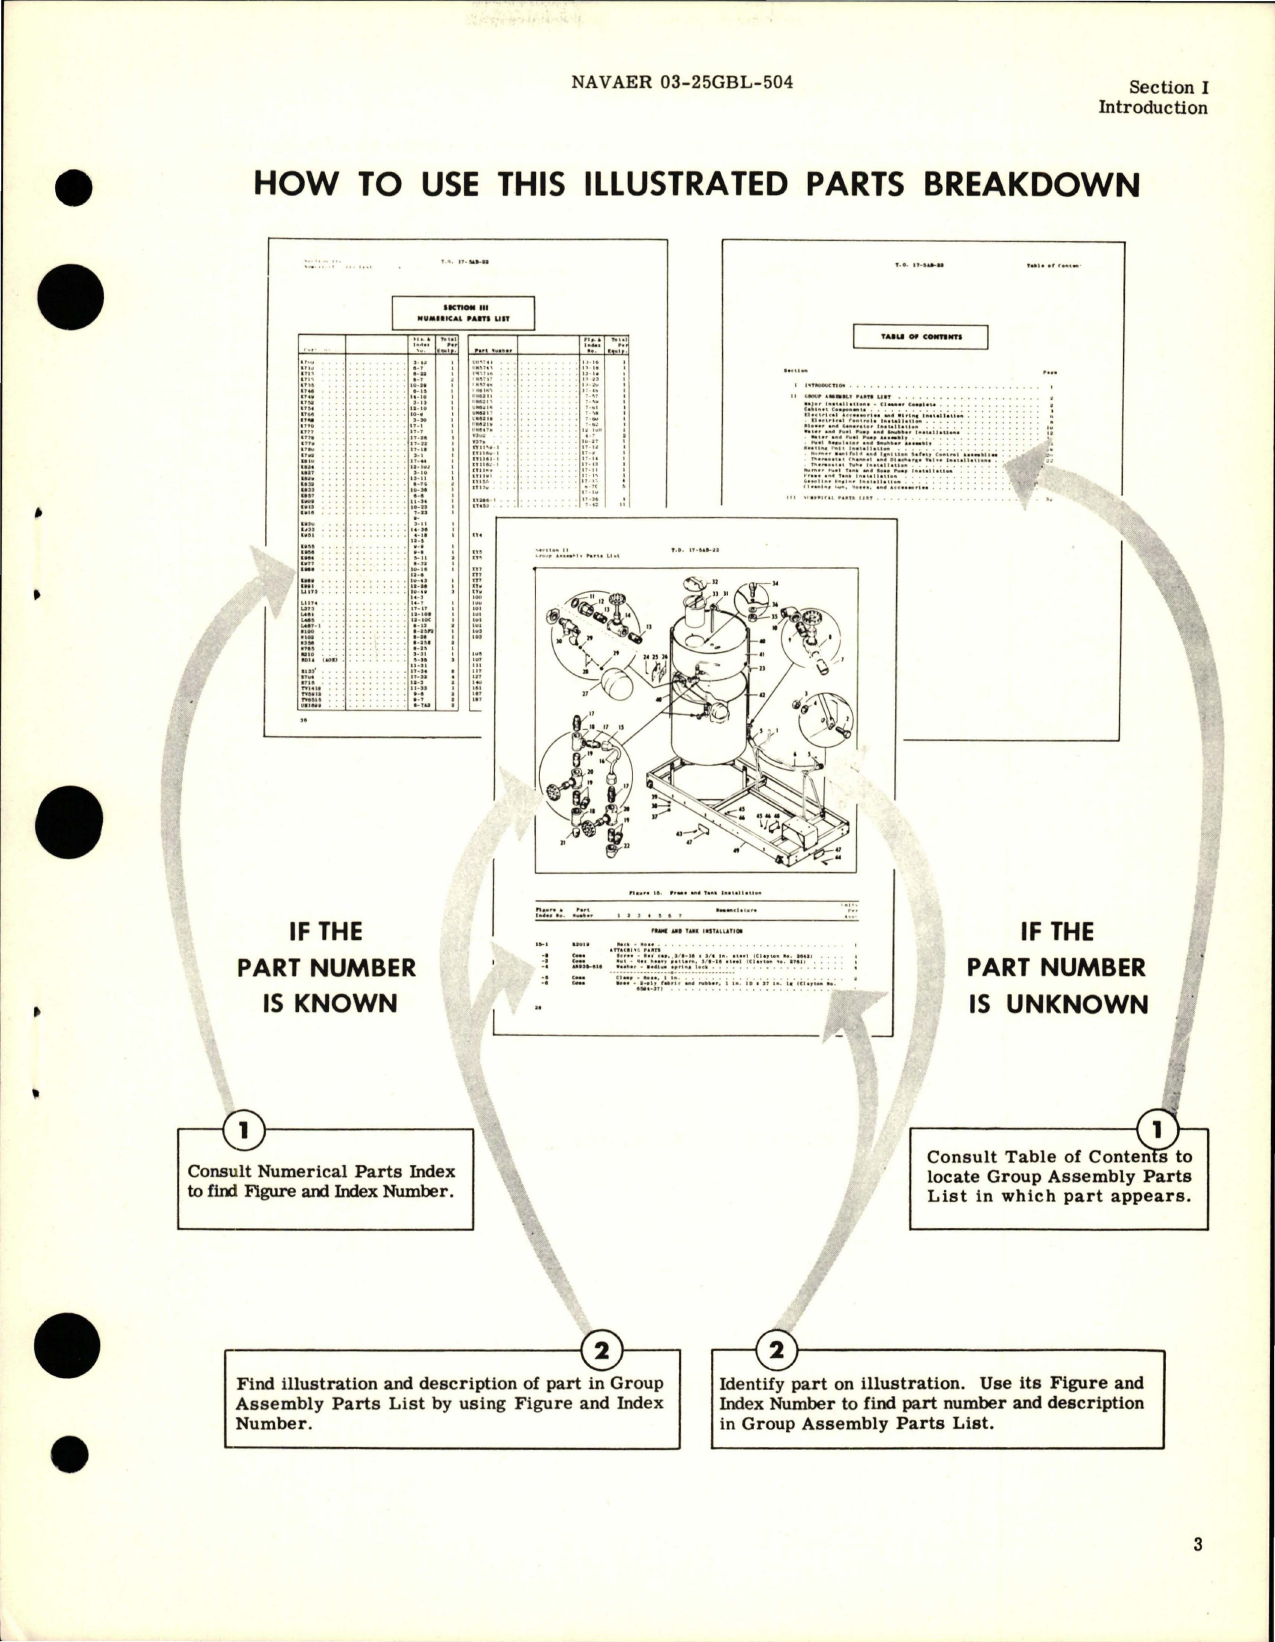 Sample page 5 from AirCorps Library document: Illustrated Parts Breakdown for Brake Pressure Debooster Cylinder - Part K4263G